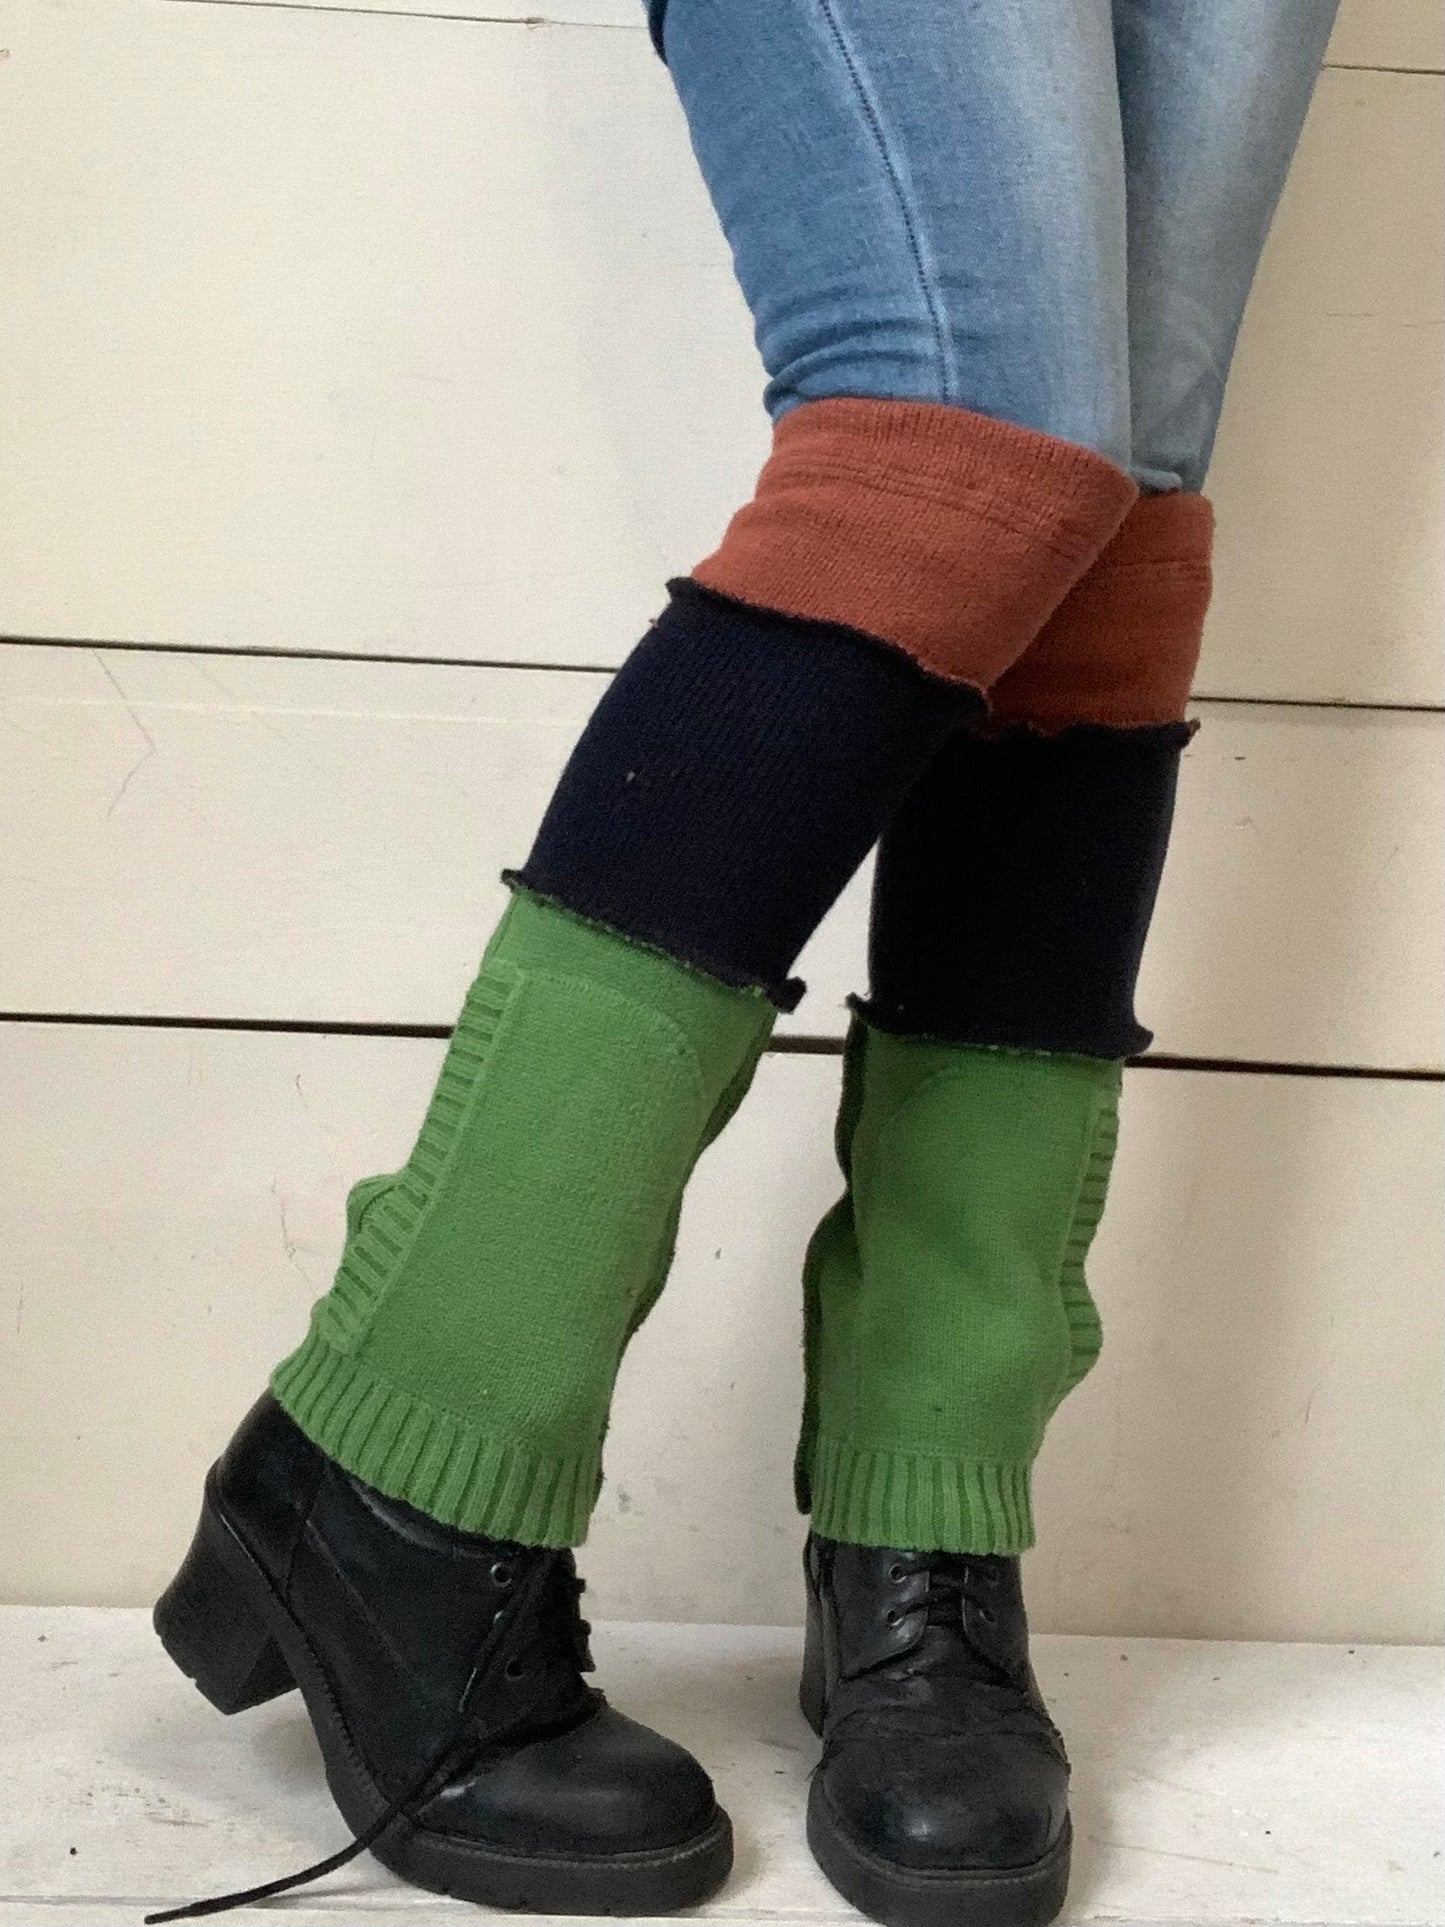 Lime, orange, navy short leg warmers and pockets